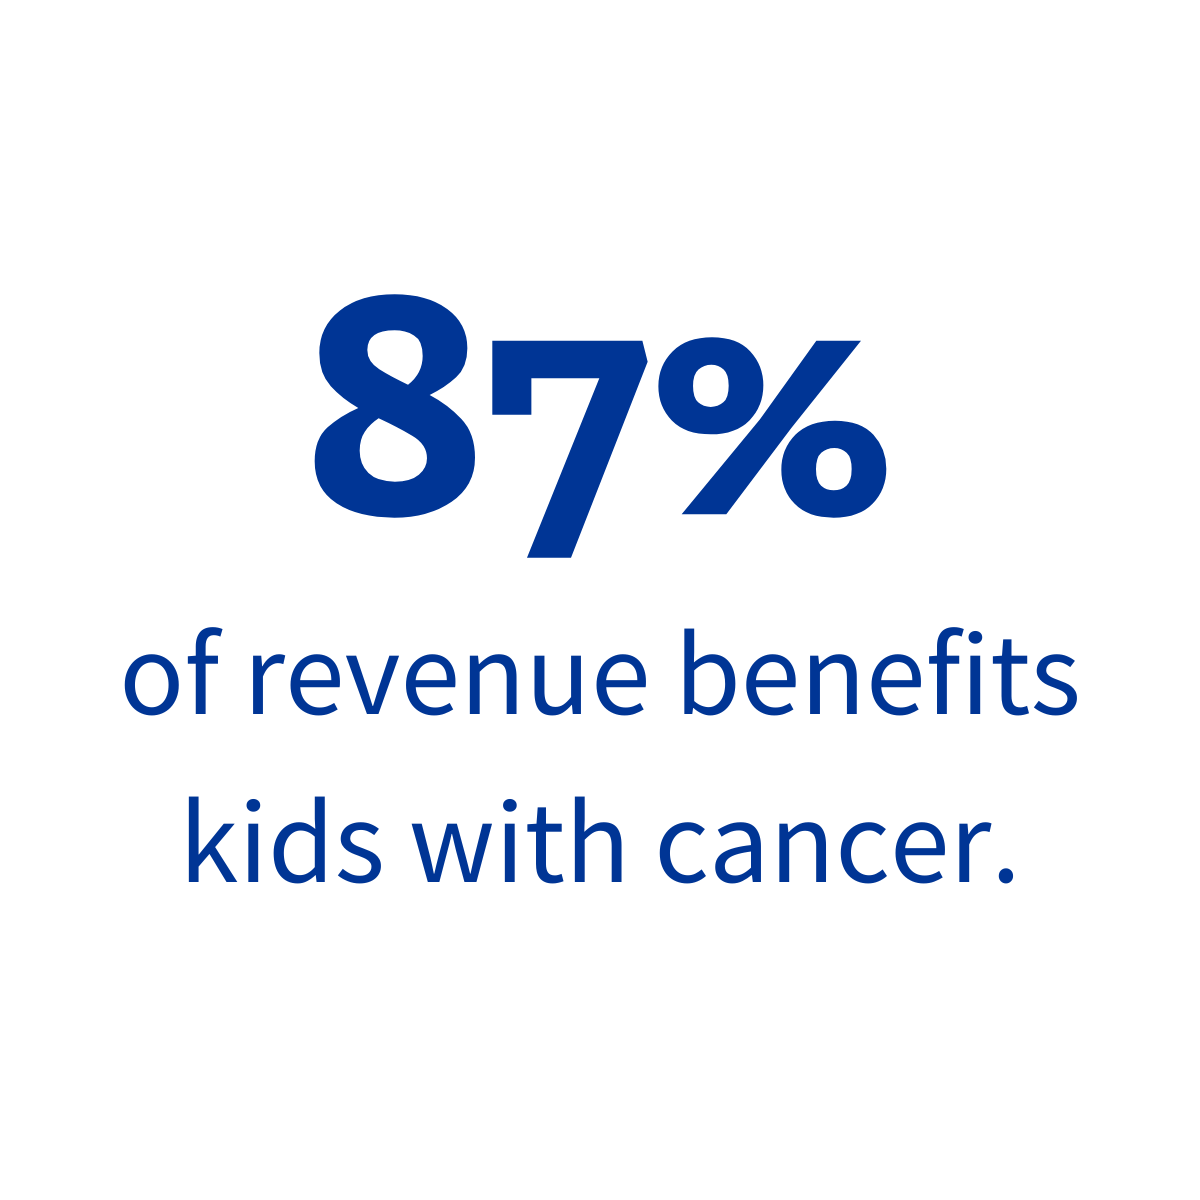 87% of revenue benefits kids with cancer